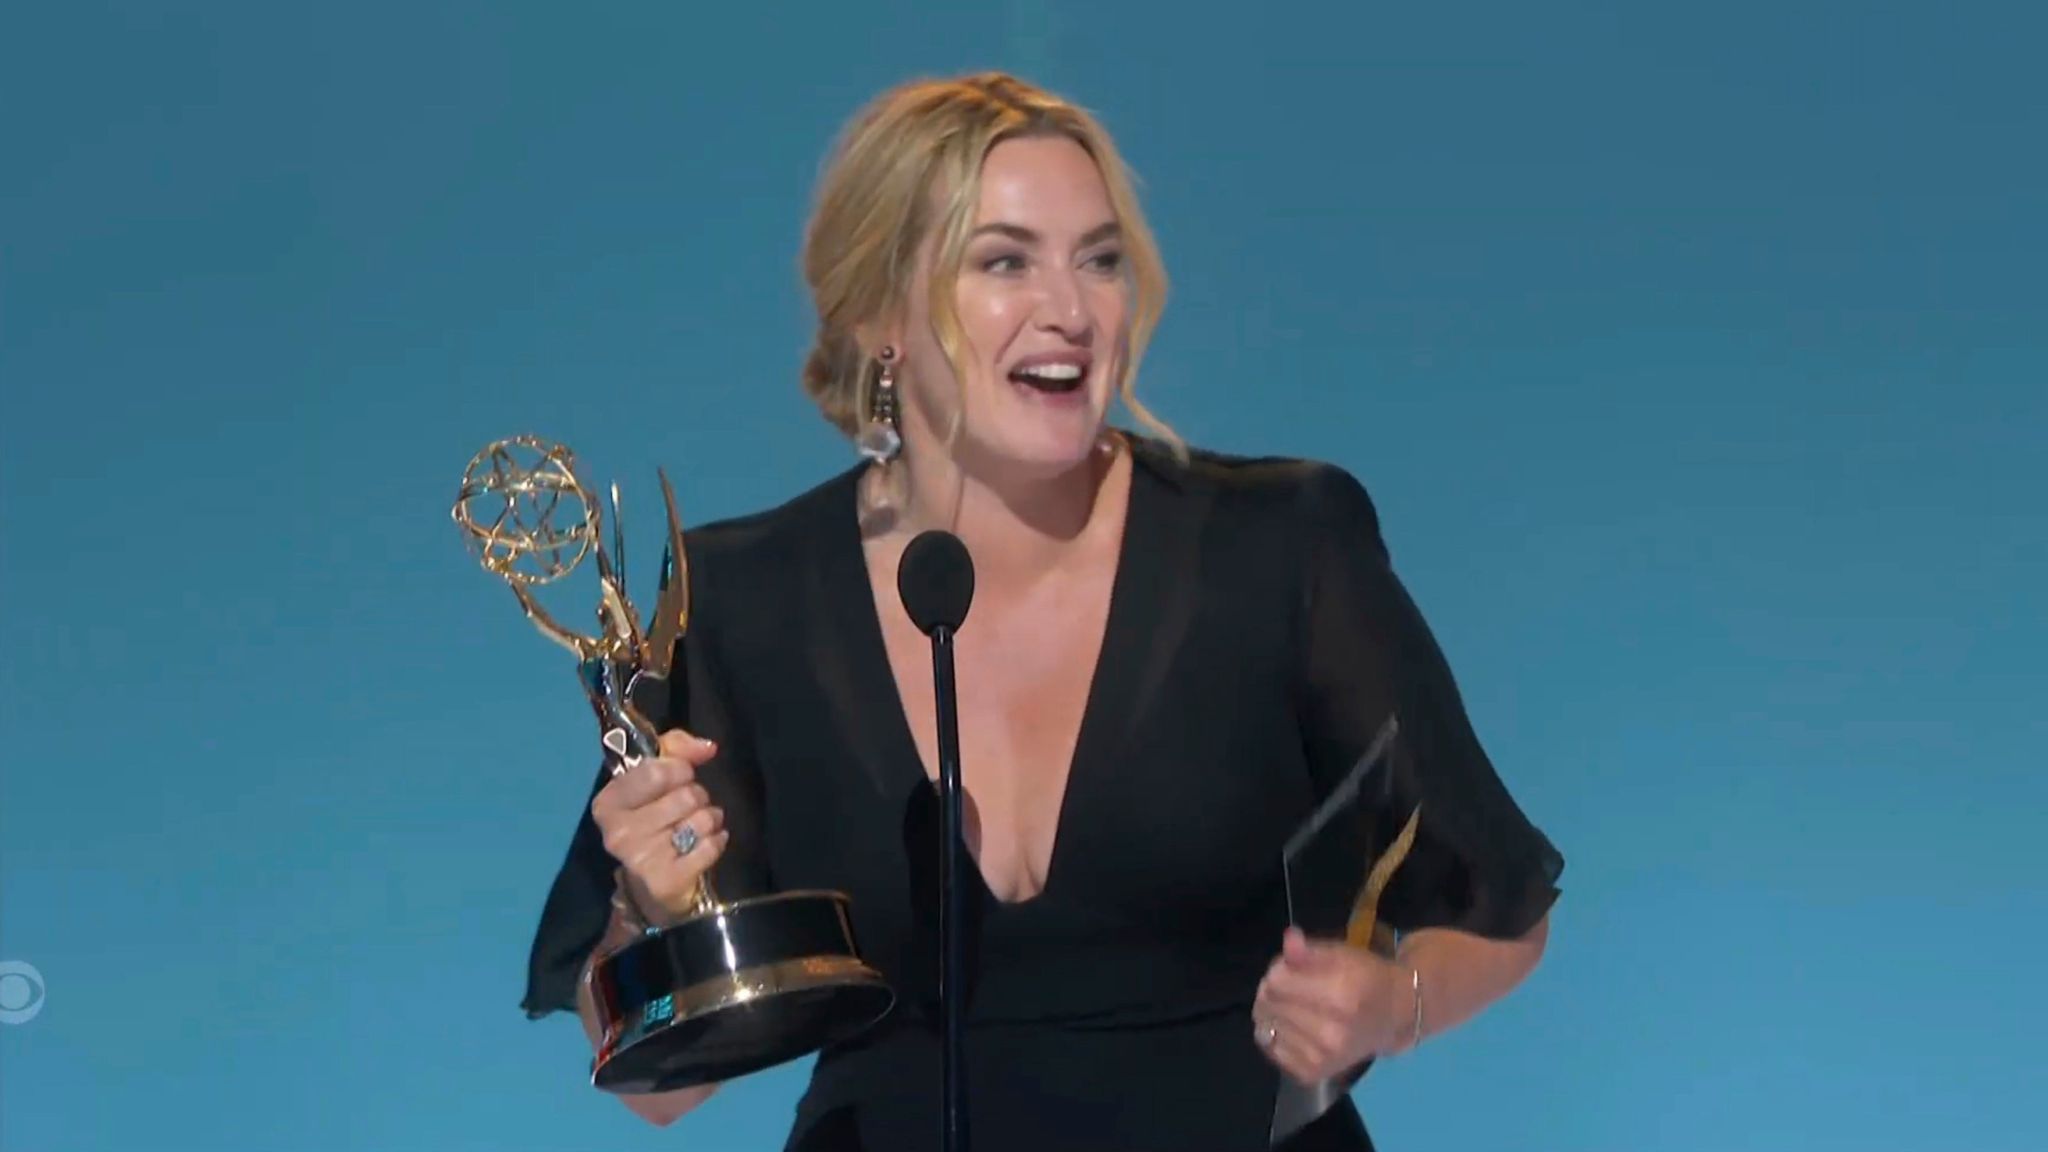 Kate Winslet was named best actress in a limited or anthology series at the 2021 Emmy Awards. Pic: AP